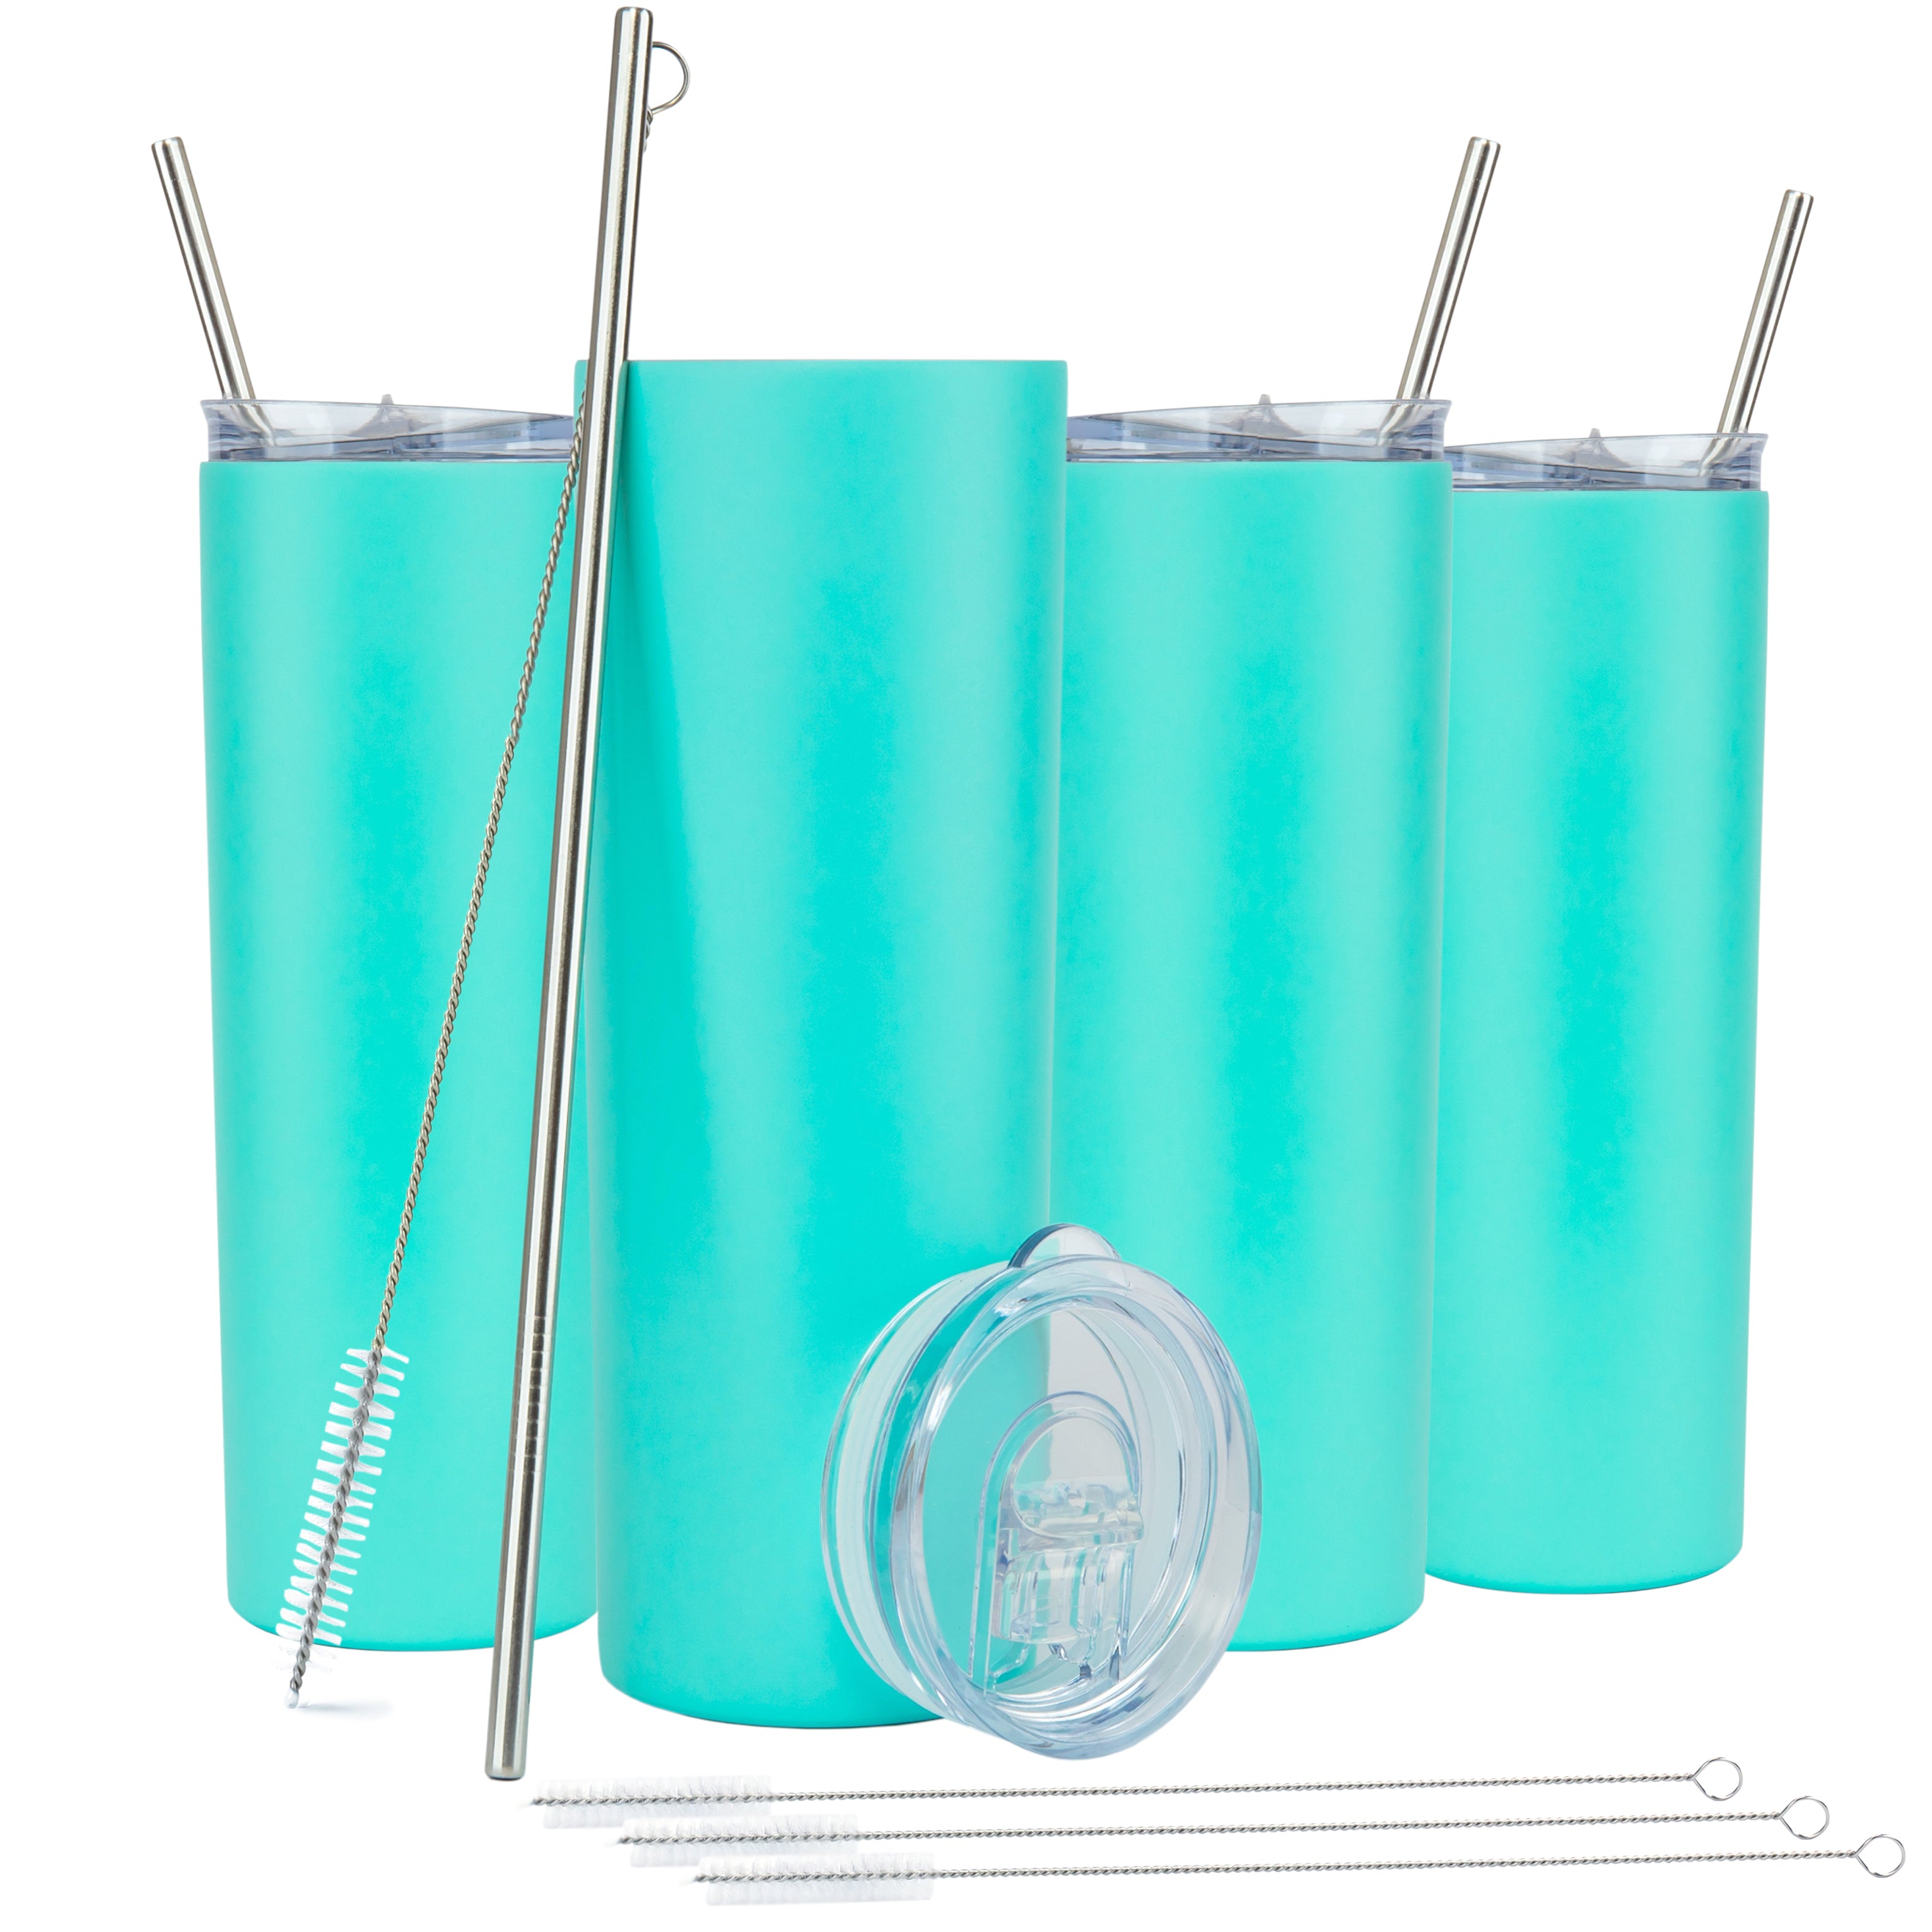 STRATA CUPS Aqua Skinny Tumbler with Lid and Straw (4 Pack) - 20 Oz Double  Wall Insulated Stainless …See more STRATA CUPS Aqua Skinny Tumbler with Lid